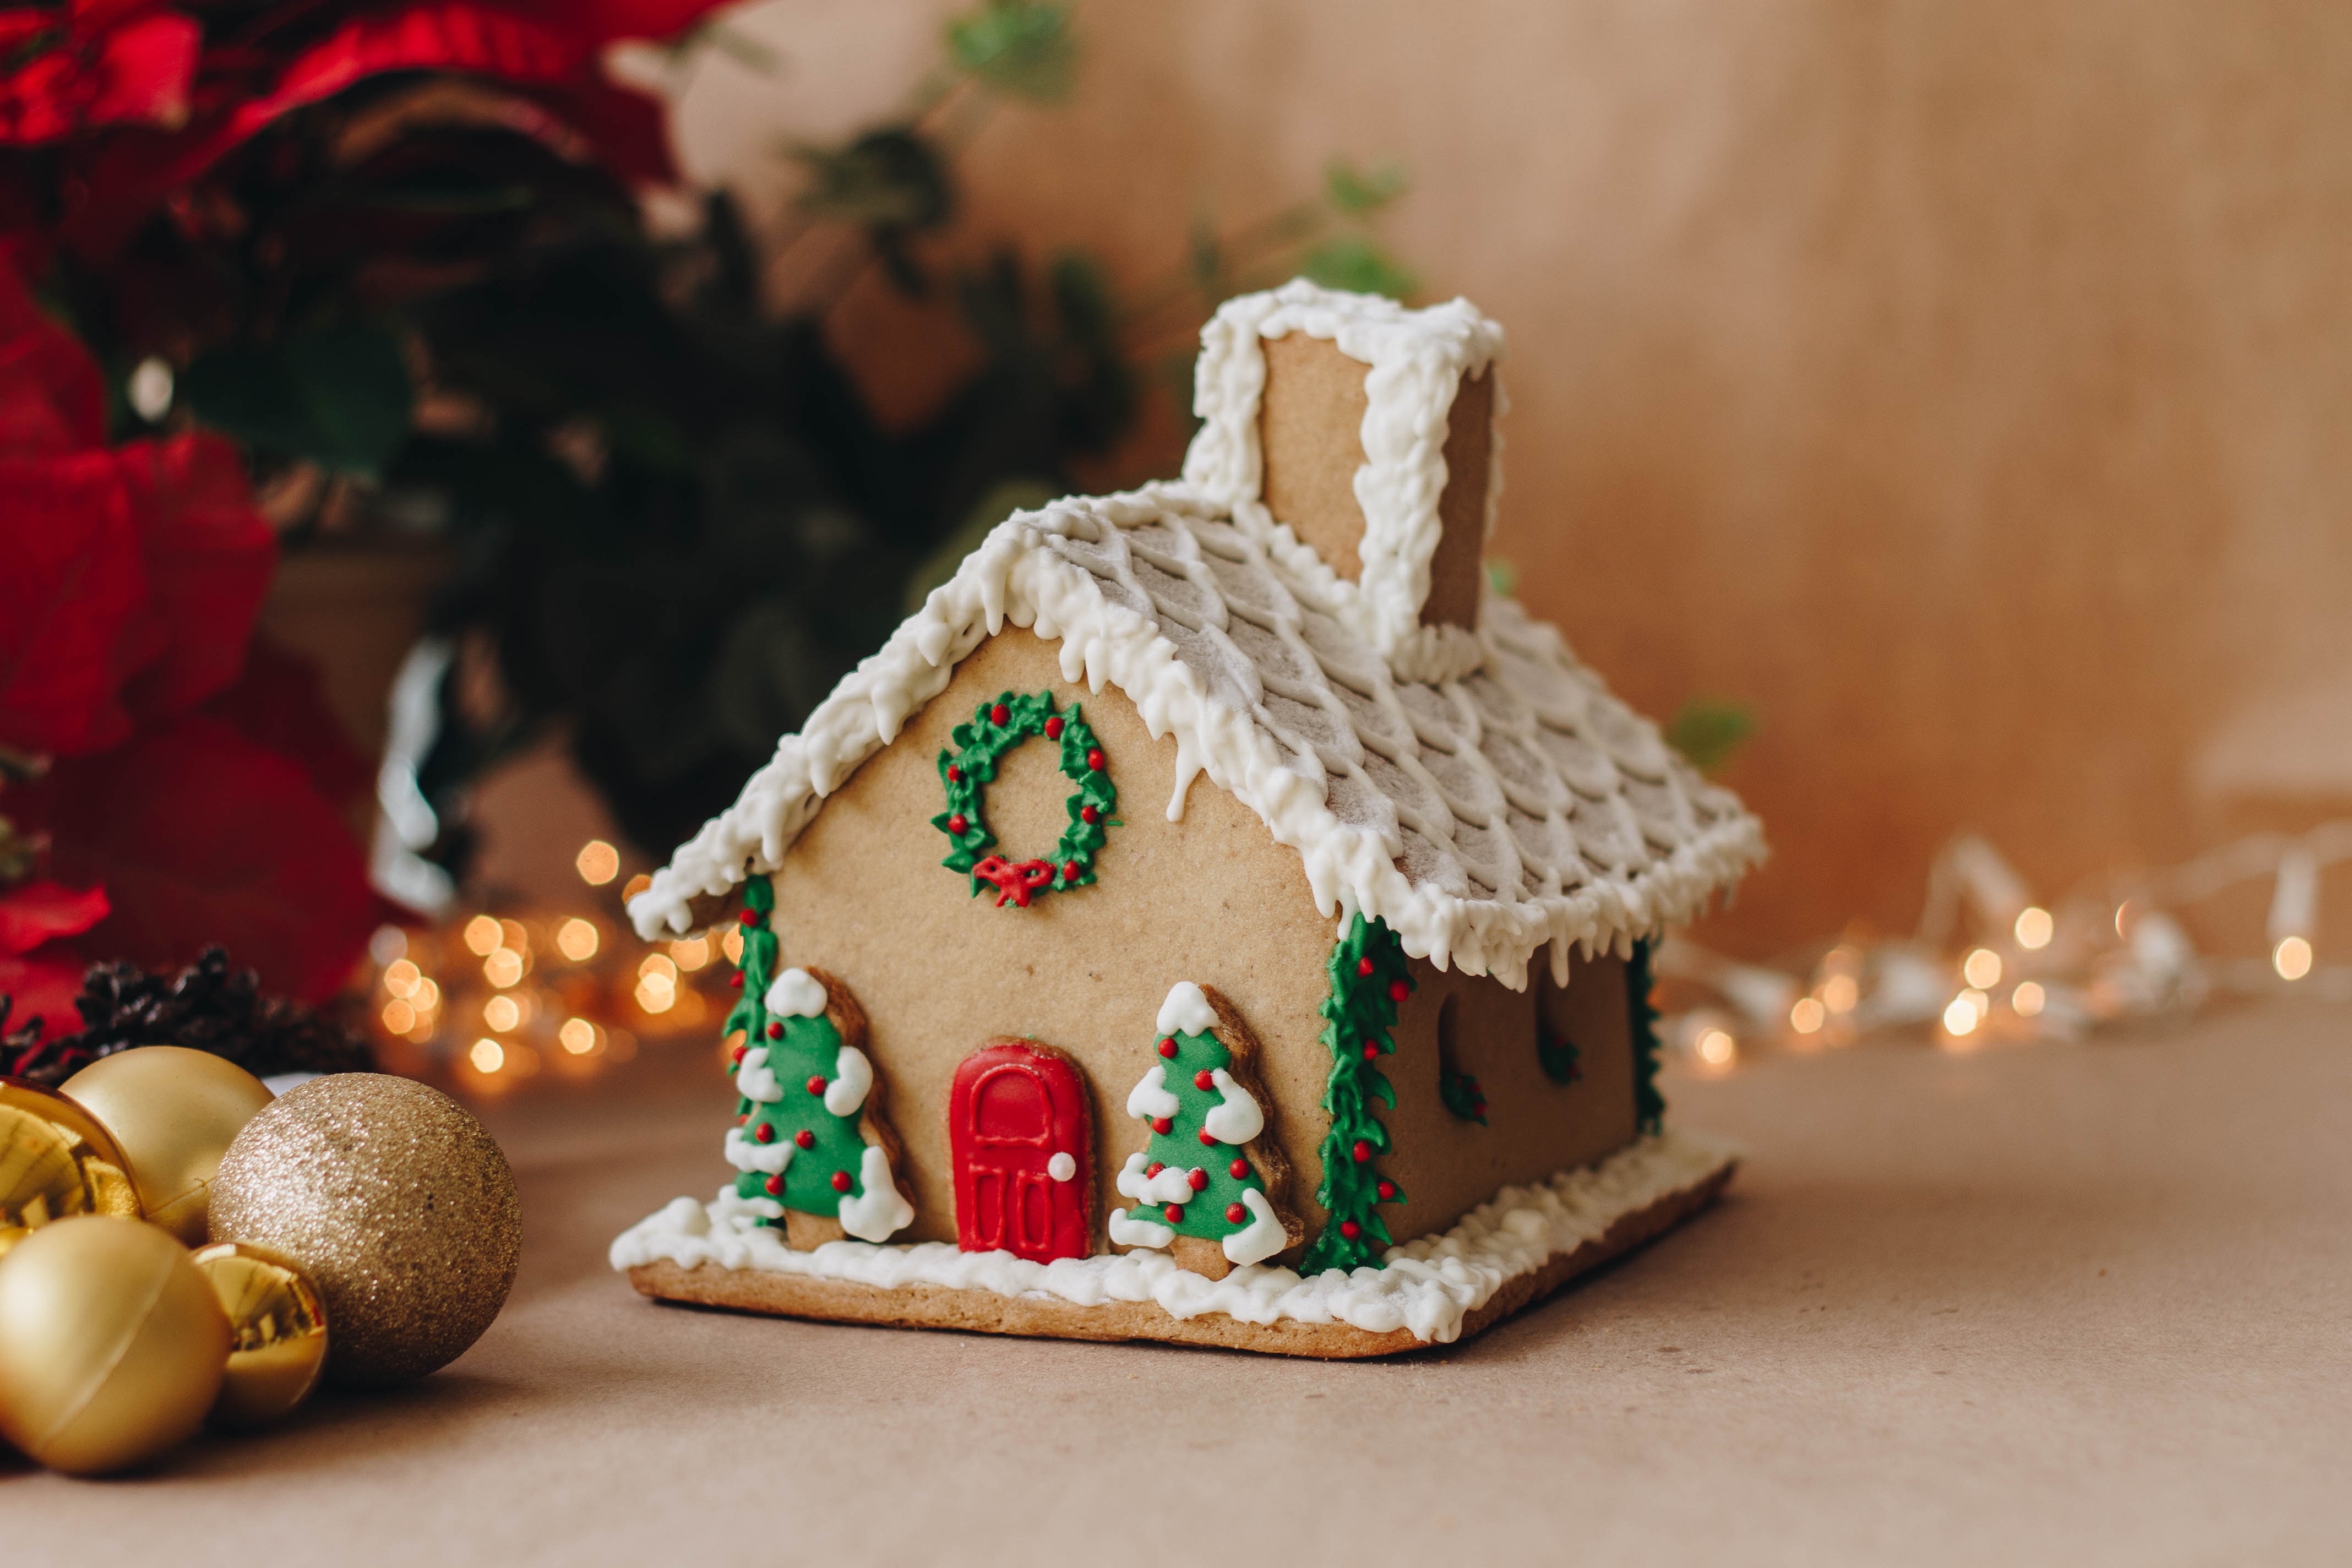 Host a gingerbread house decorating contest as a holiday fundraising idea